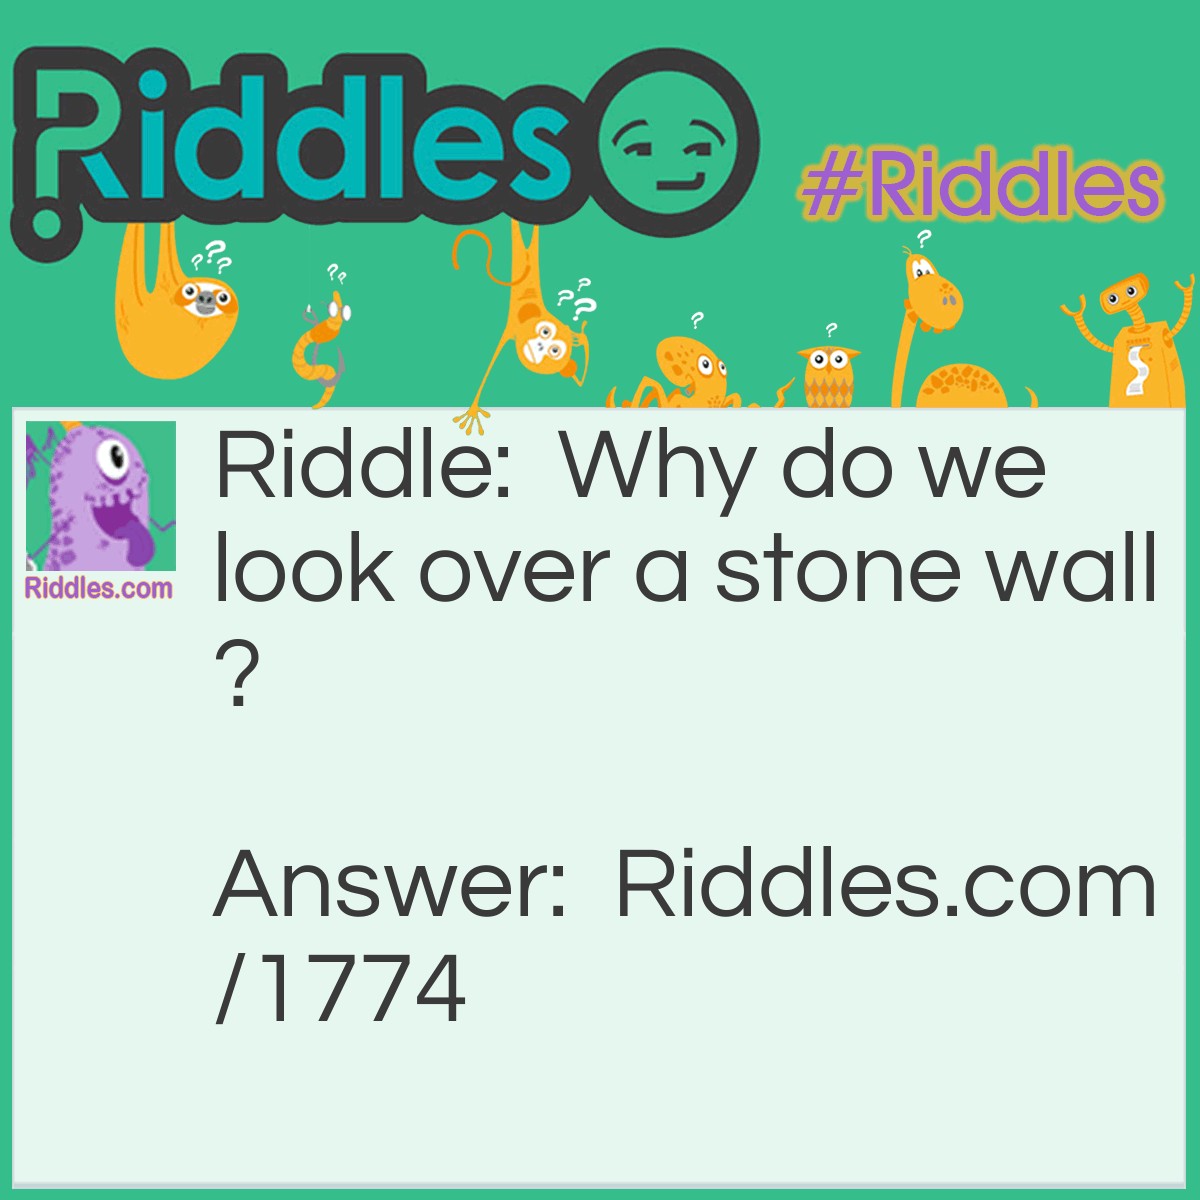 Riddle: Why do we look over a stone wall? Answer: Because we cannot see through it.